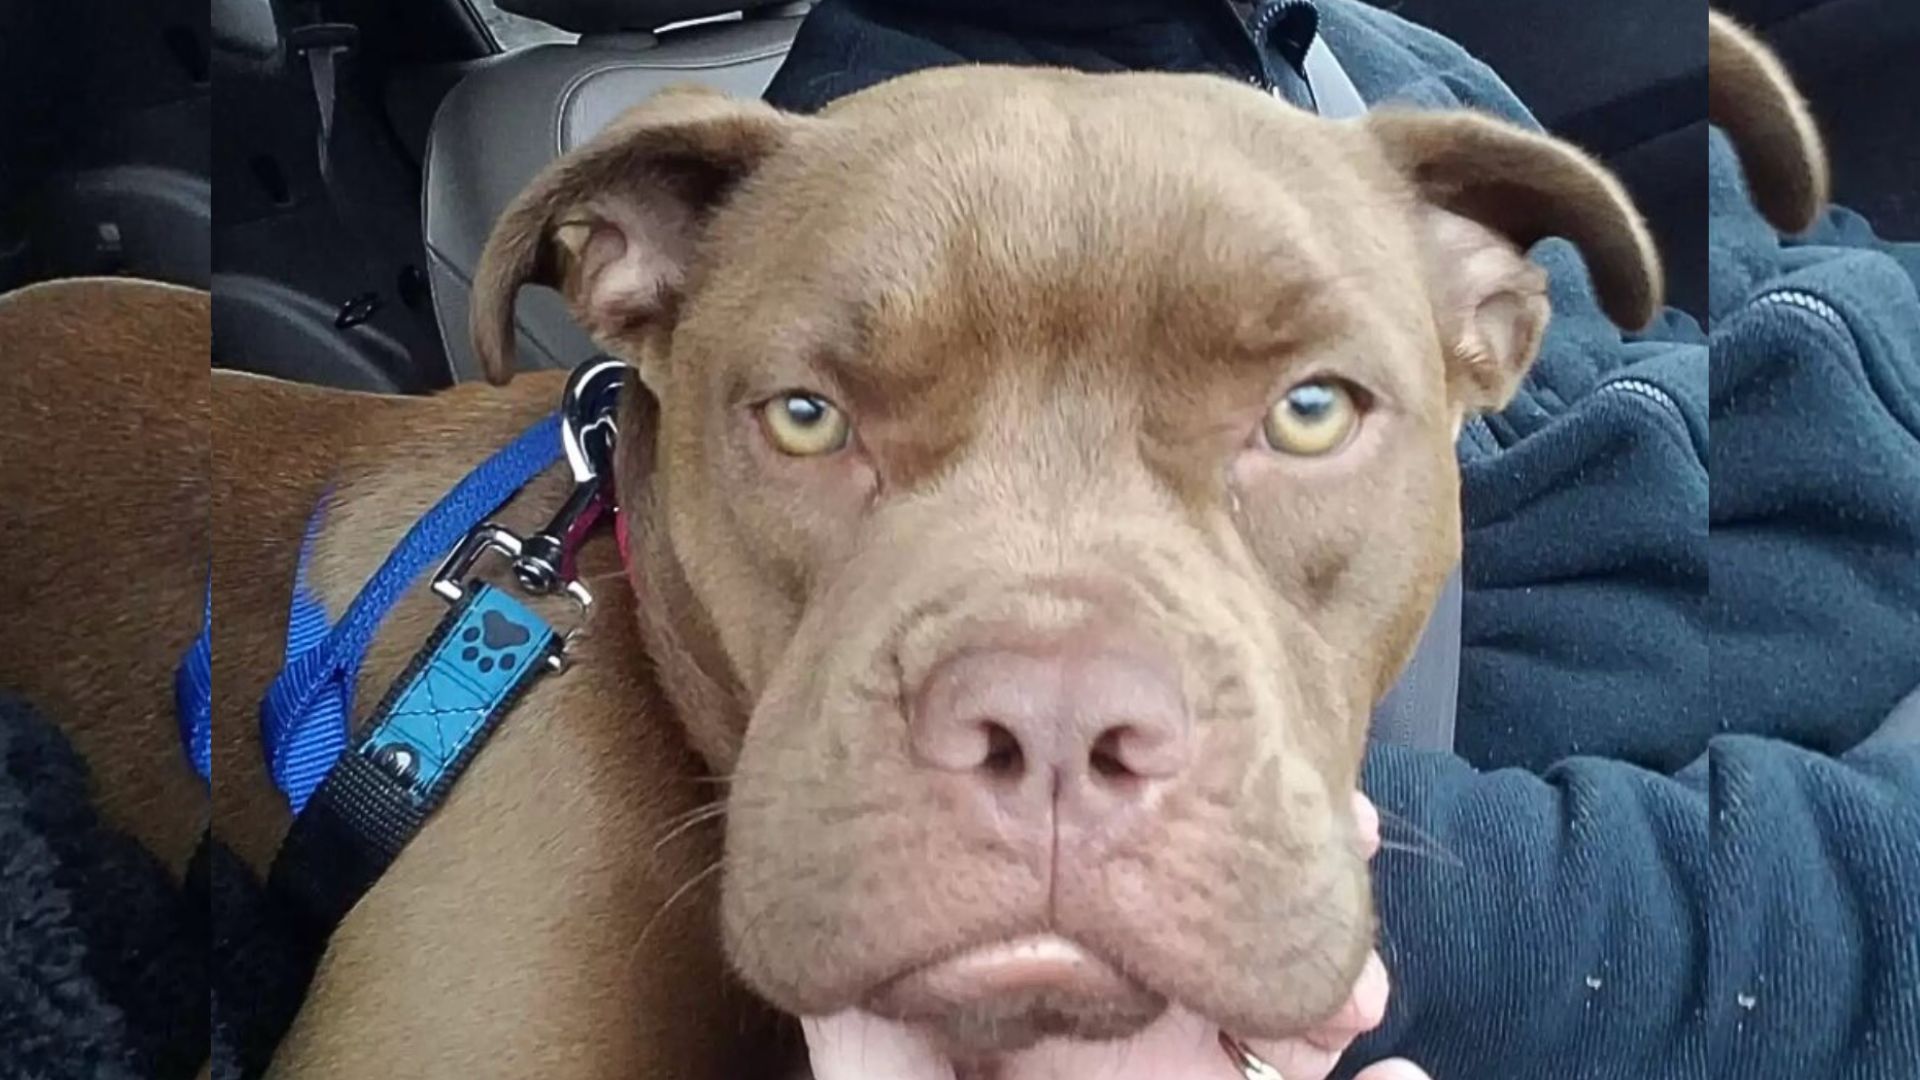 A Volunteer Drives Lost Pup 1,300 Miles Home Only To Find Out Her Owner Doesn’t Want Her